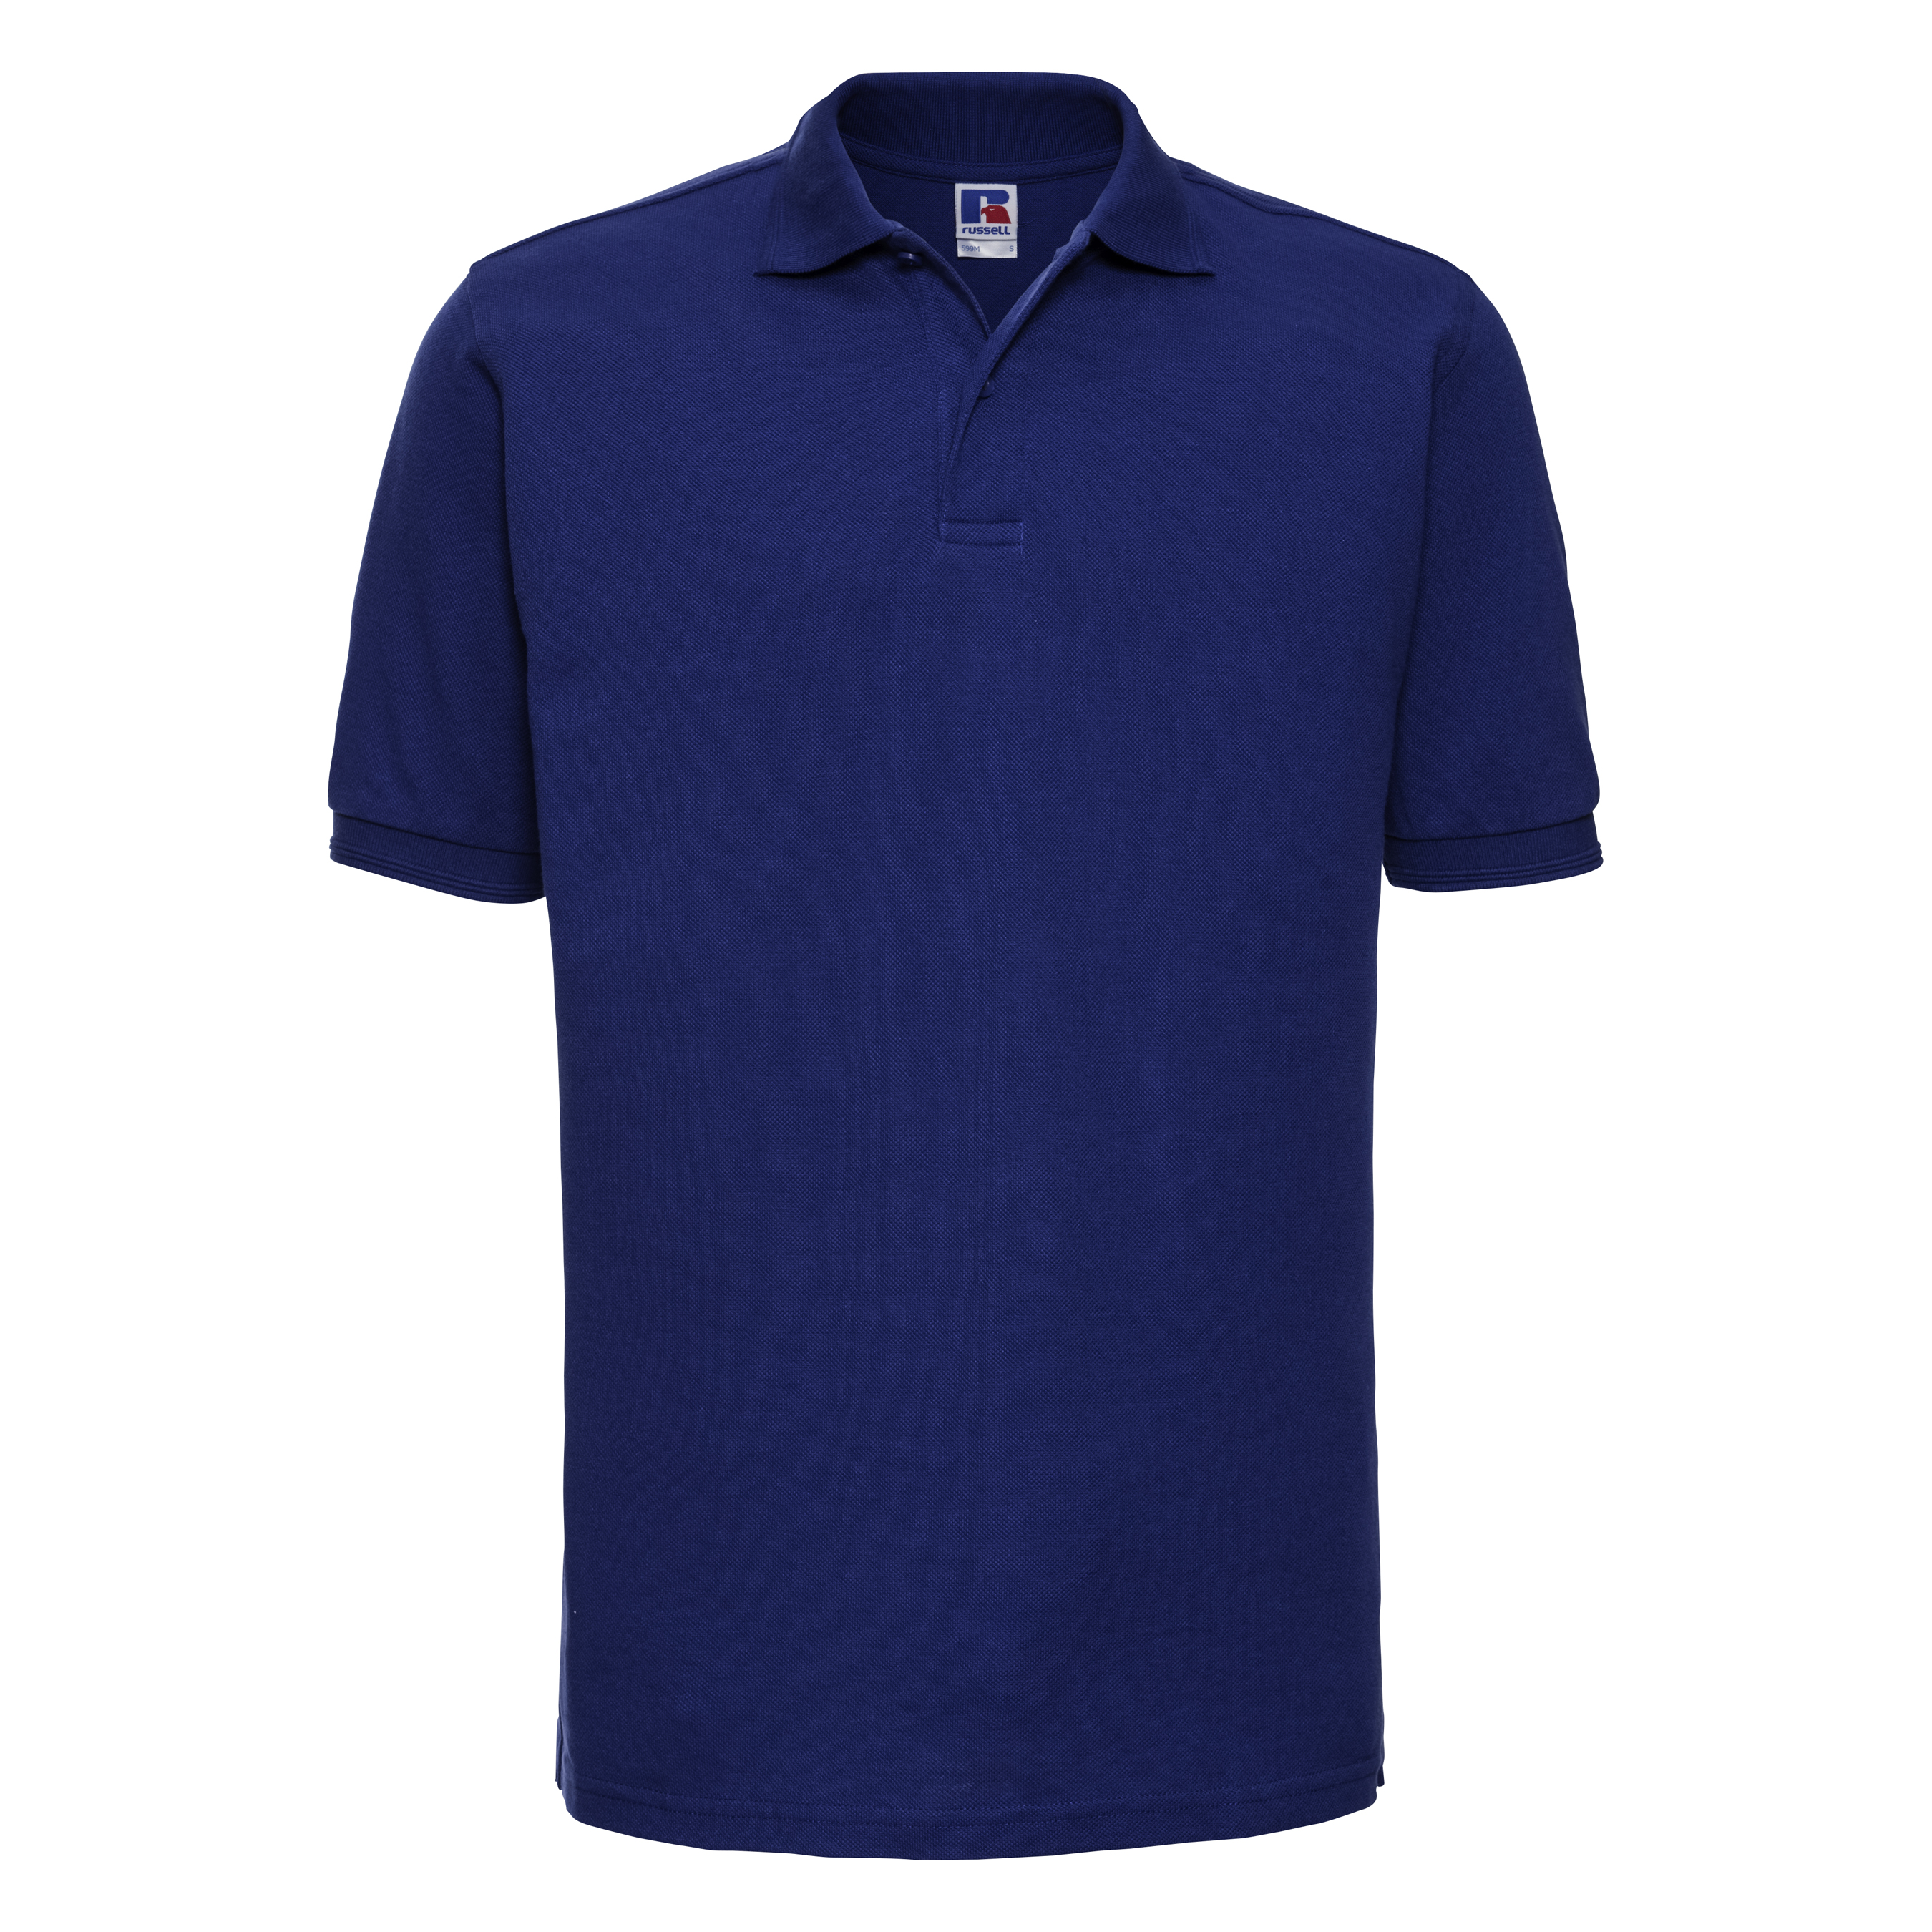 ax-httpswebsystems.s3.amazonaws.comtmp_for_downloadrussell-hardwearing-wash-polo-bright-royal.jpg